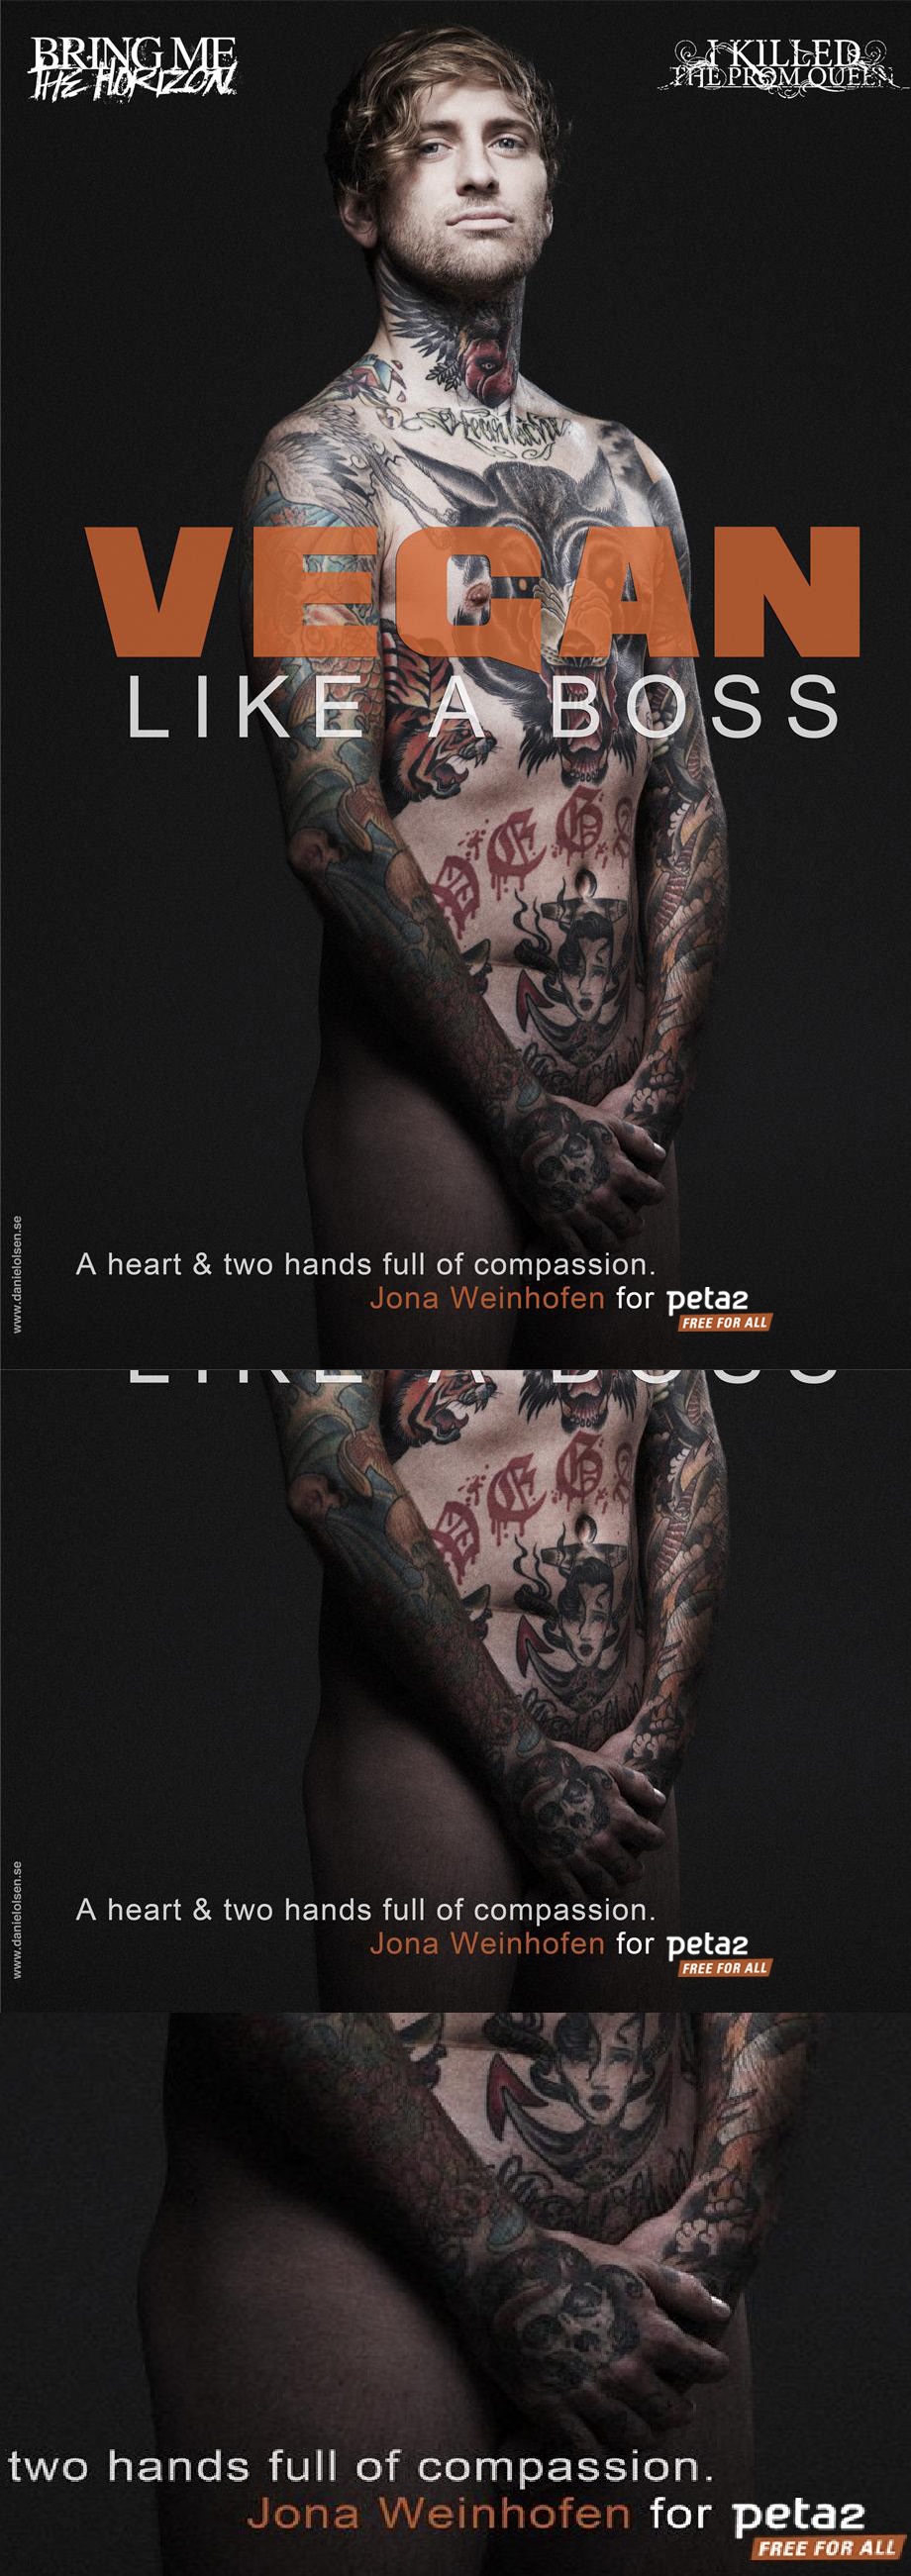 Compassion is a nice way to put it... [NSFW]